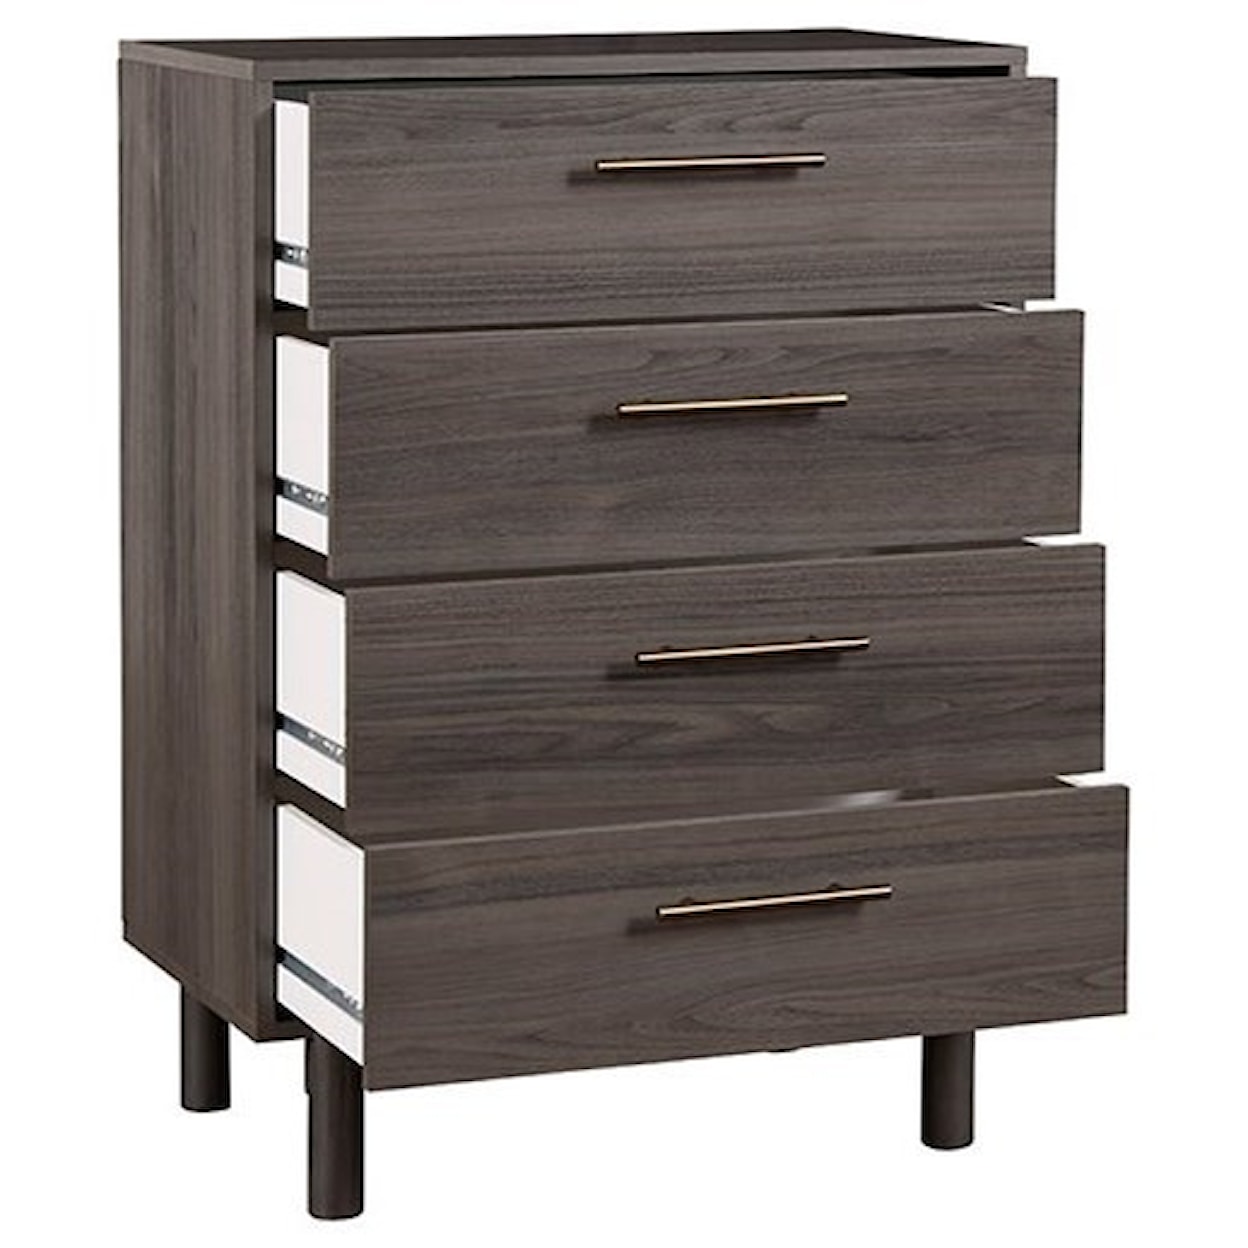 Signature Design by Ashley Brymont Drawer Chest